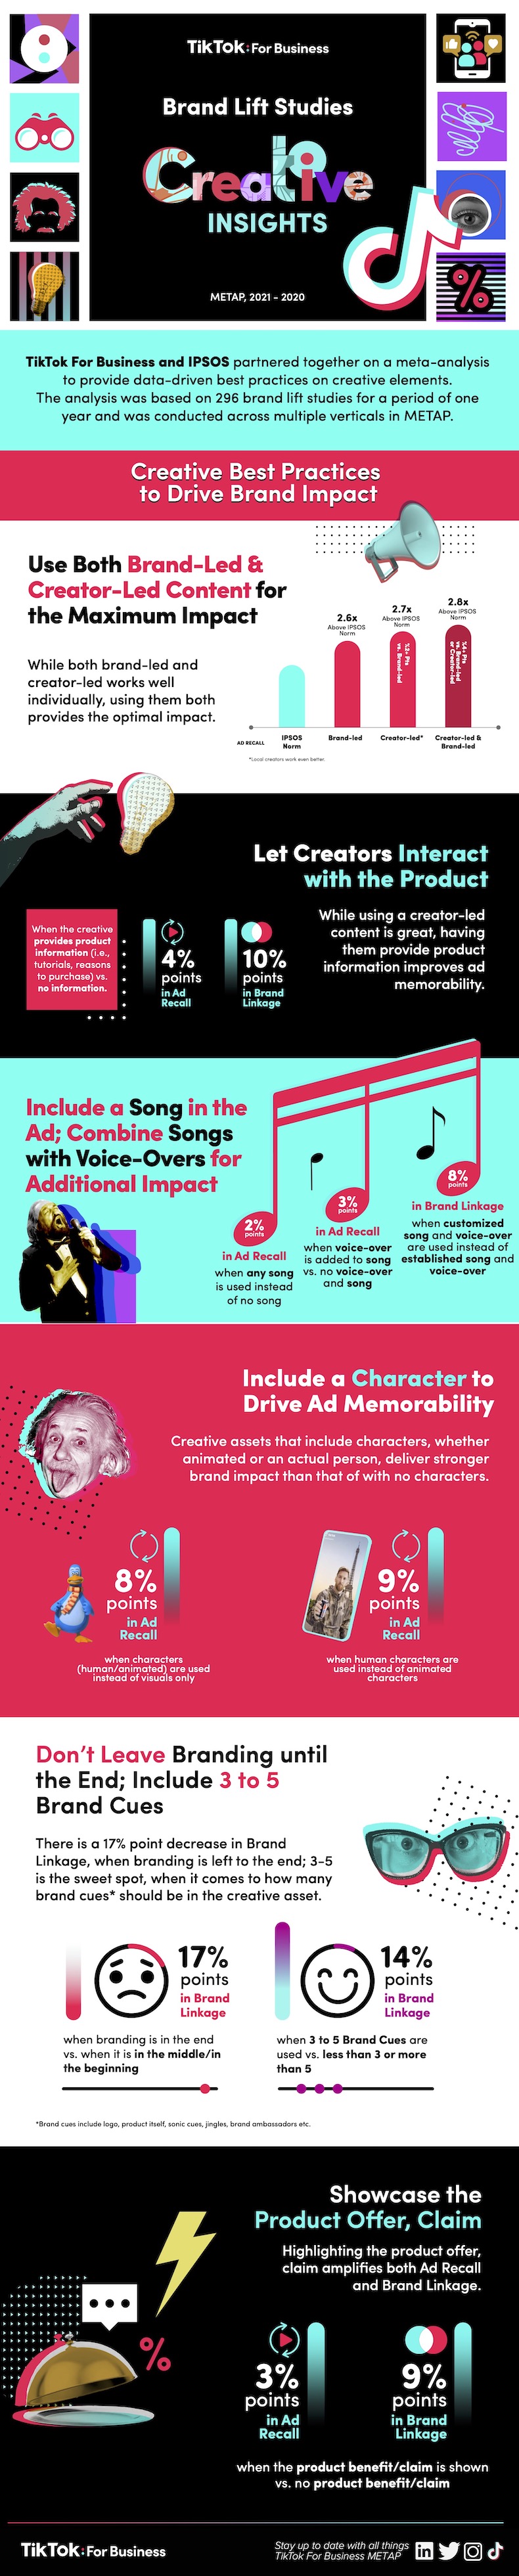 TikTok for businesses creative insights infographic